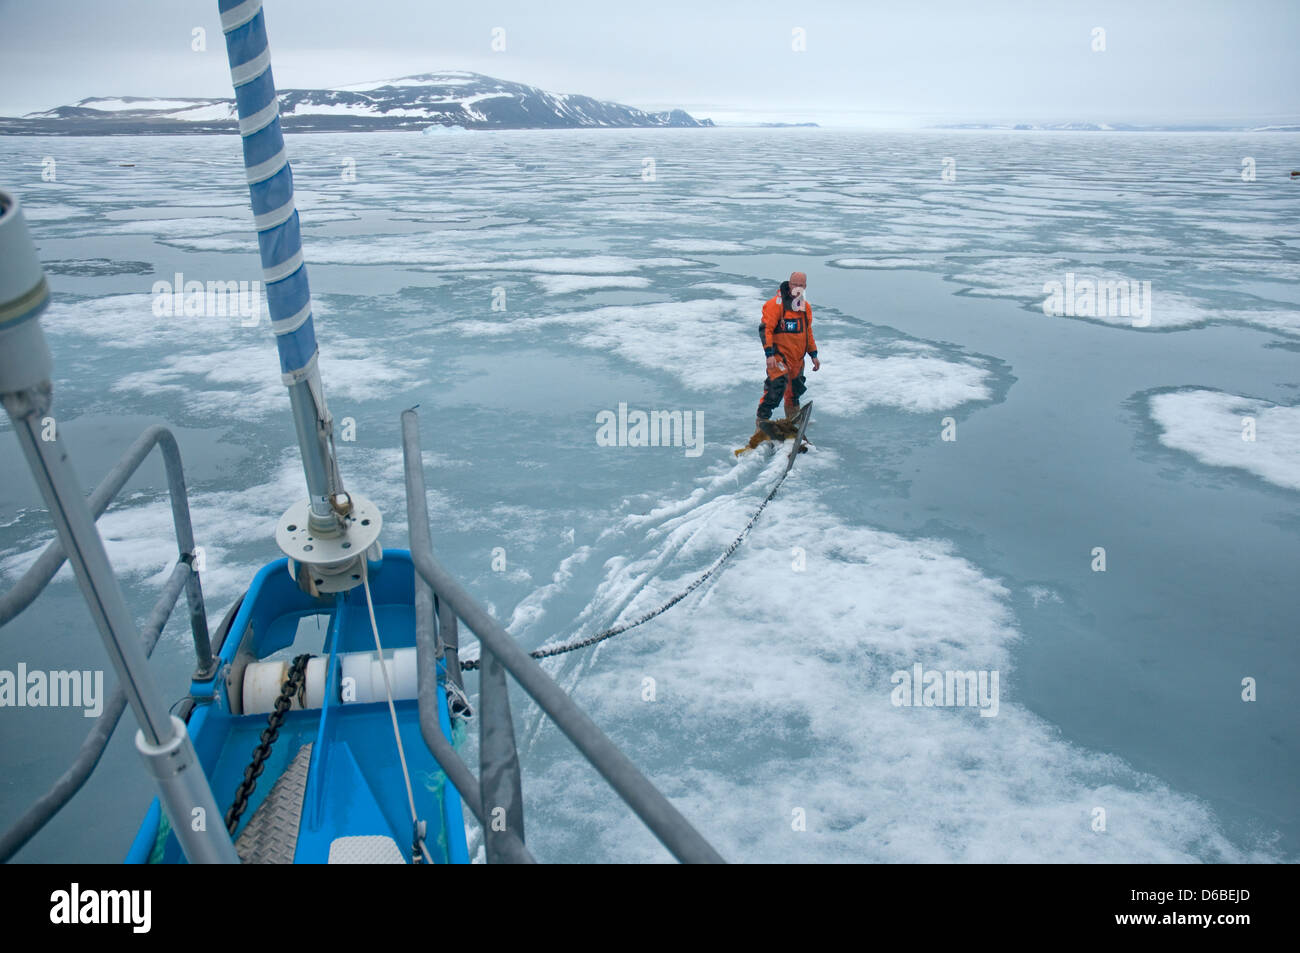 Norway, Svalbard Archipelago, Spitsbergen. Sailboat captain drops anchor in fjord ice along the coast. Stock Photo